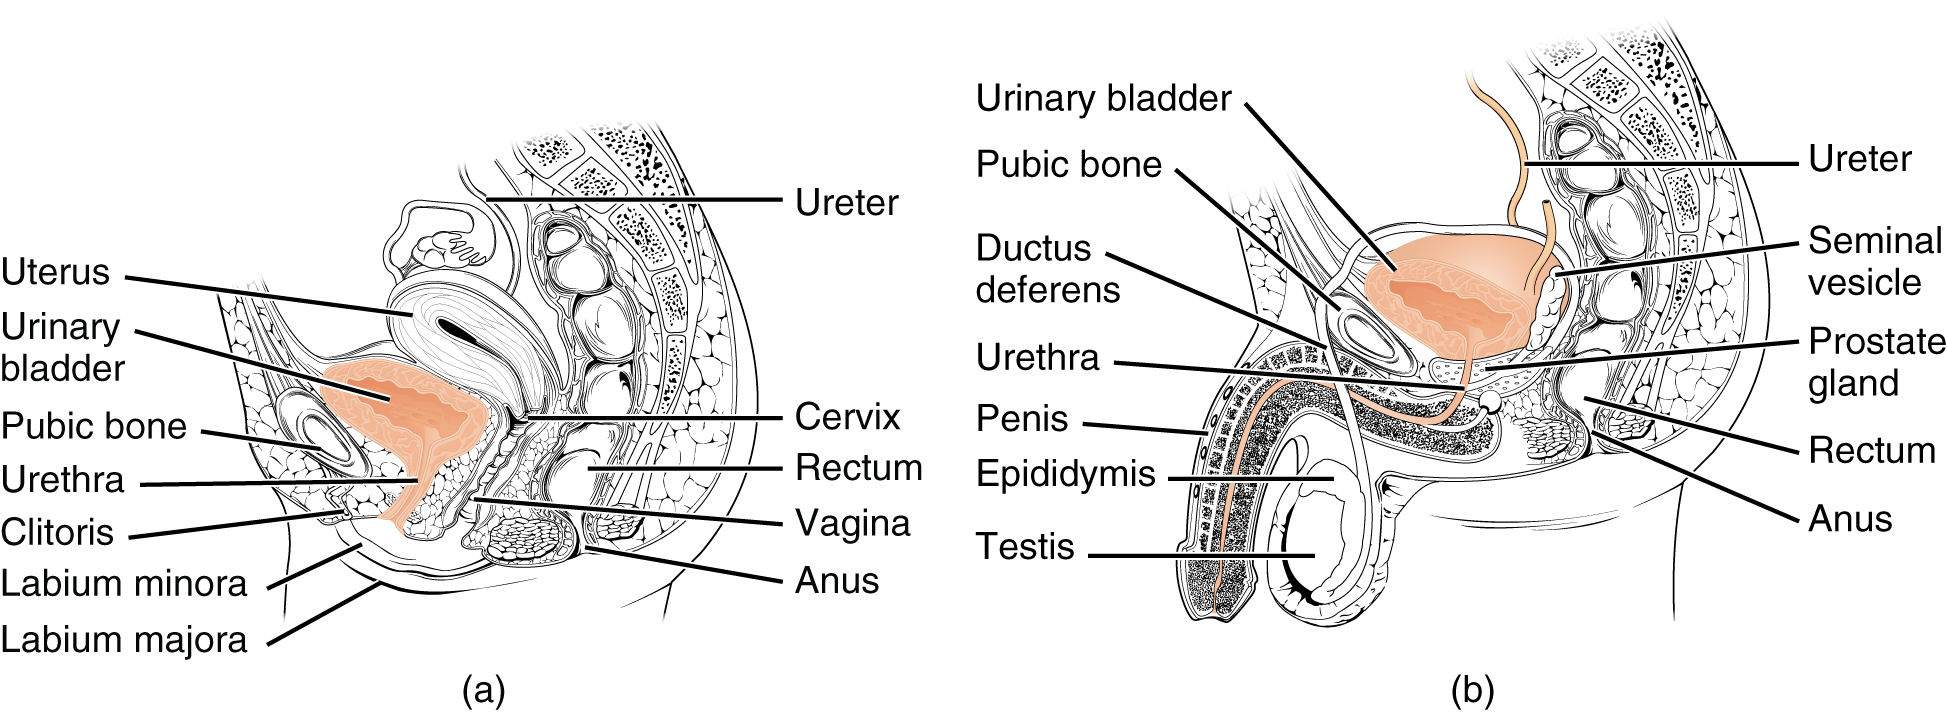 The left panel of this figure shows the organs in the female urinary system and the right panel is the male.